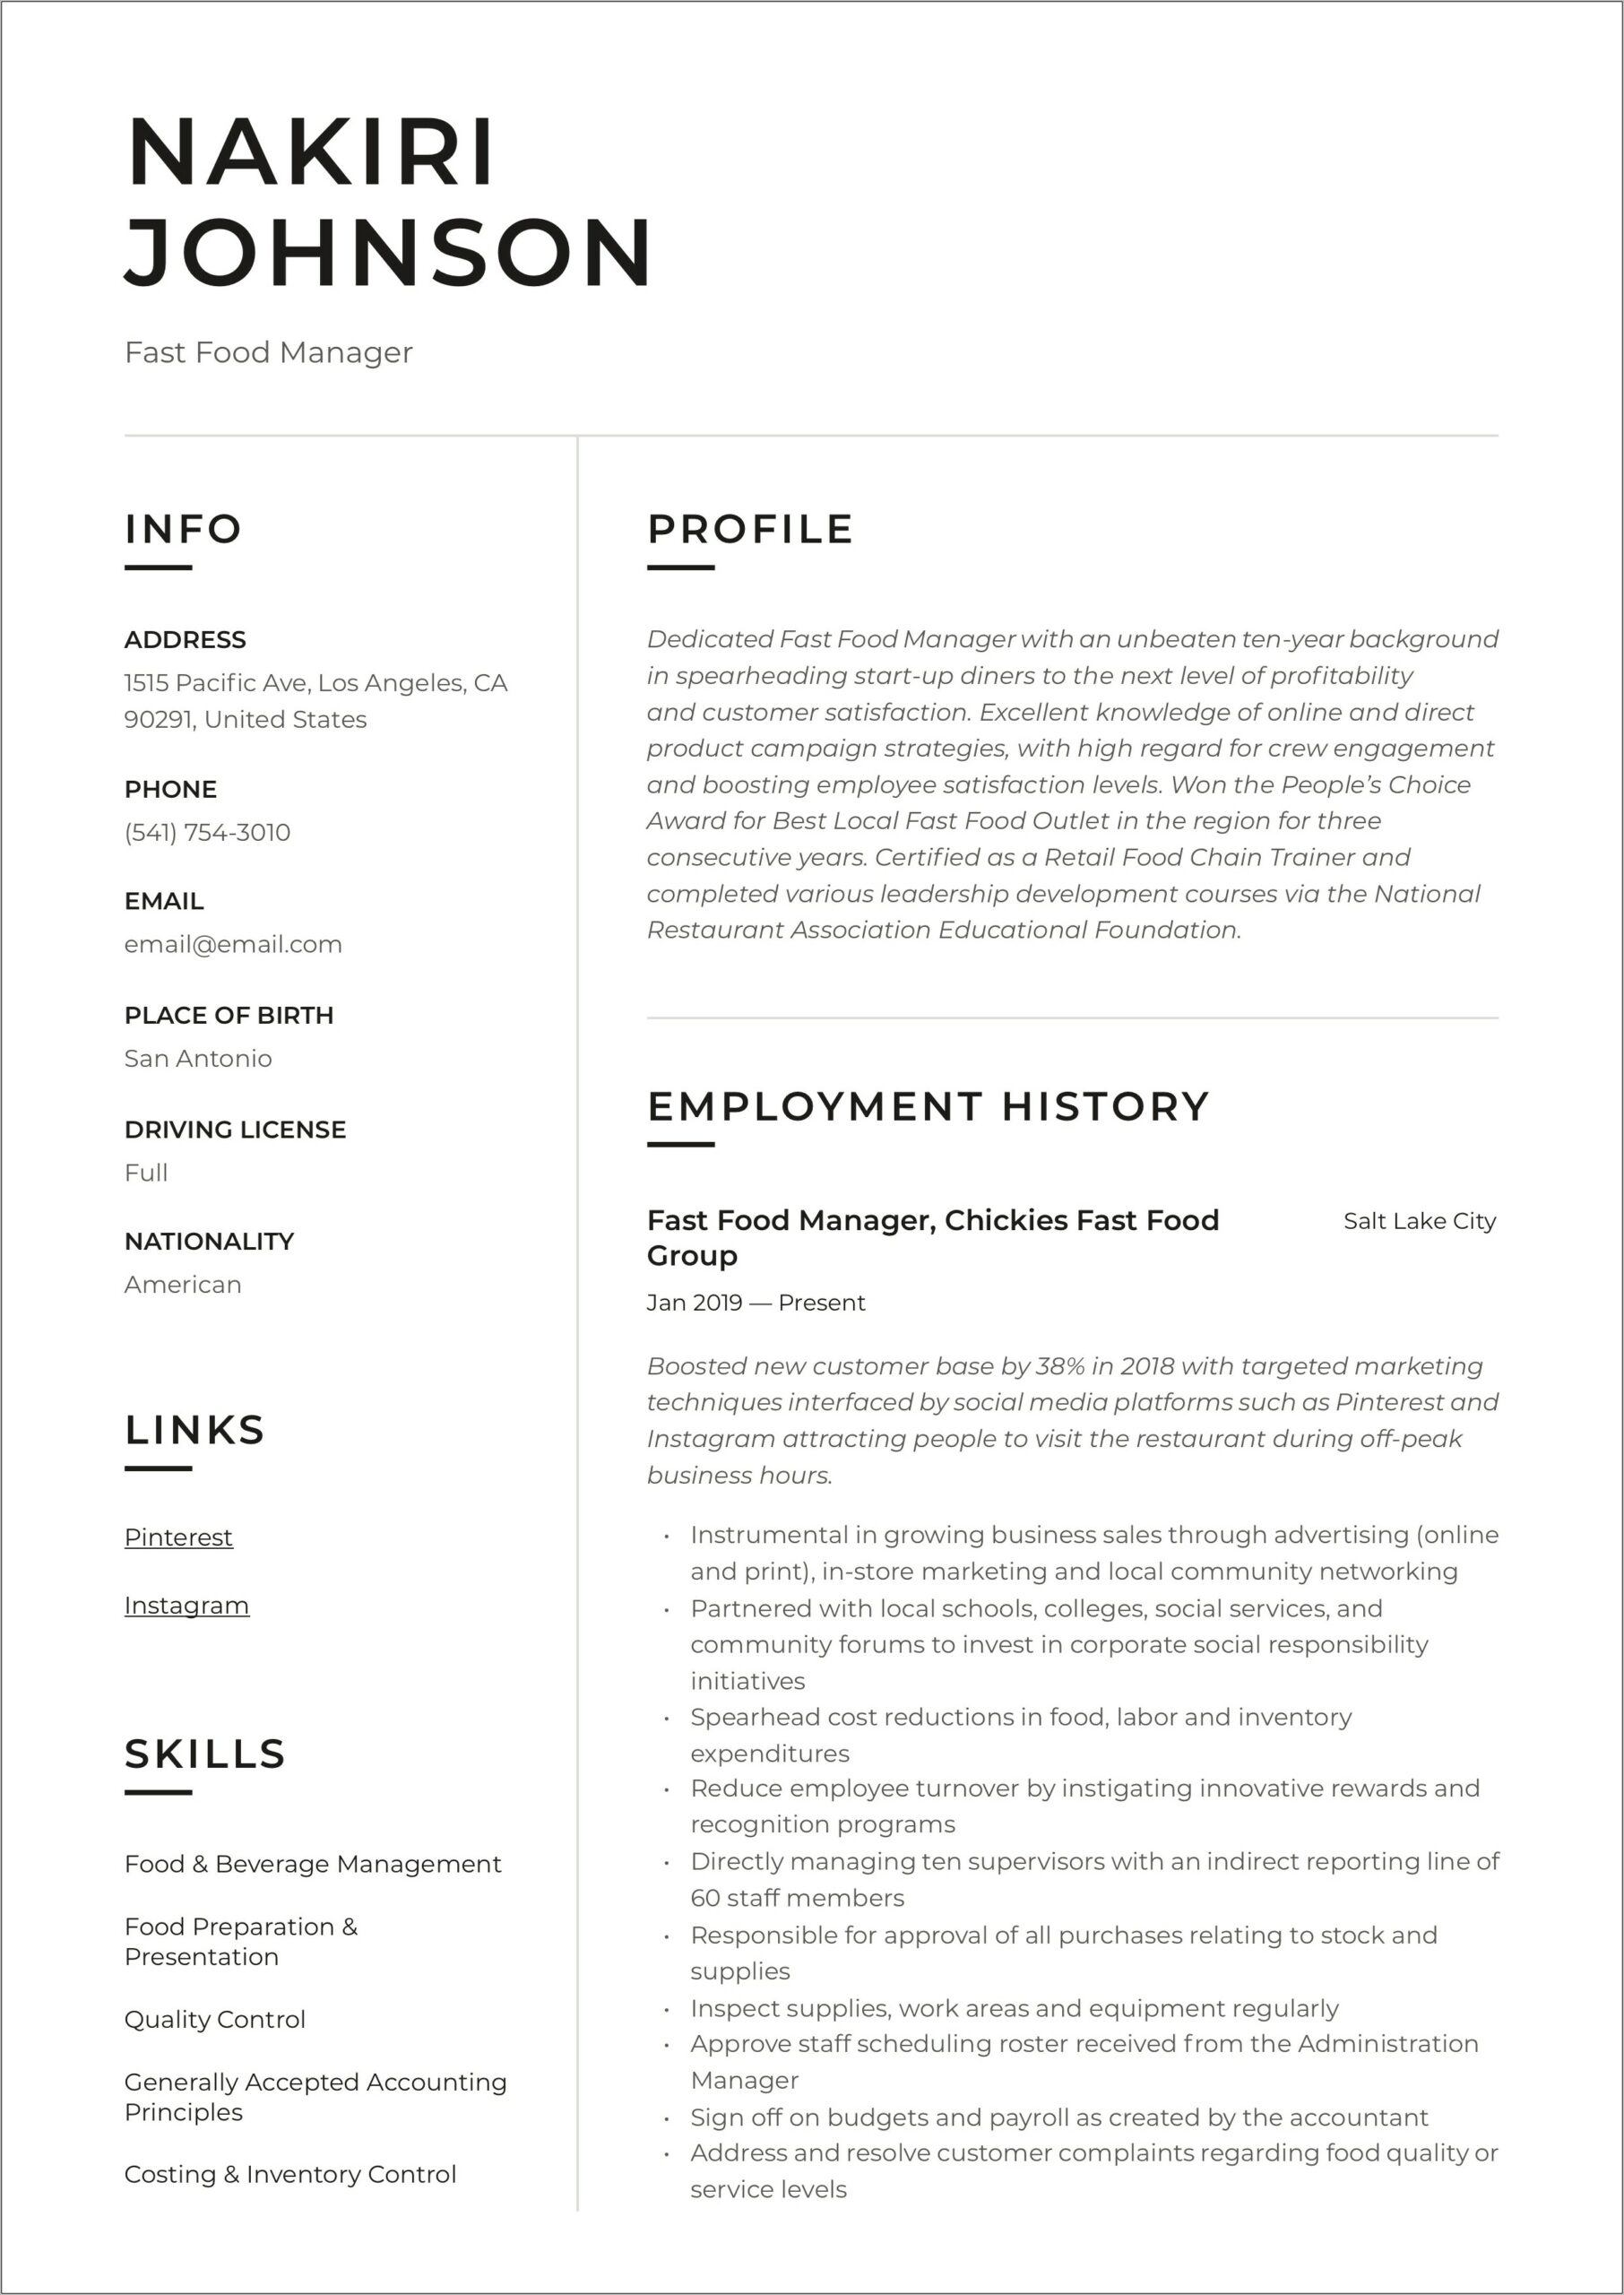 Resume For First Job Fast Food